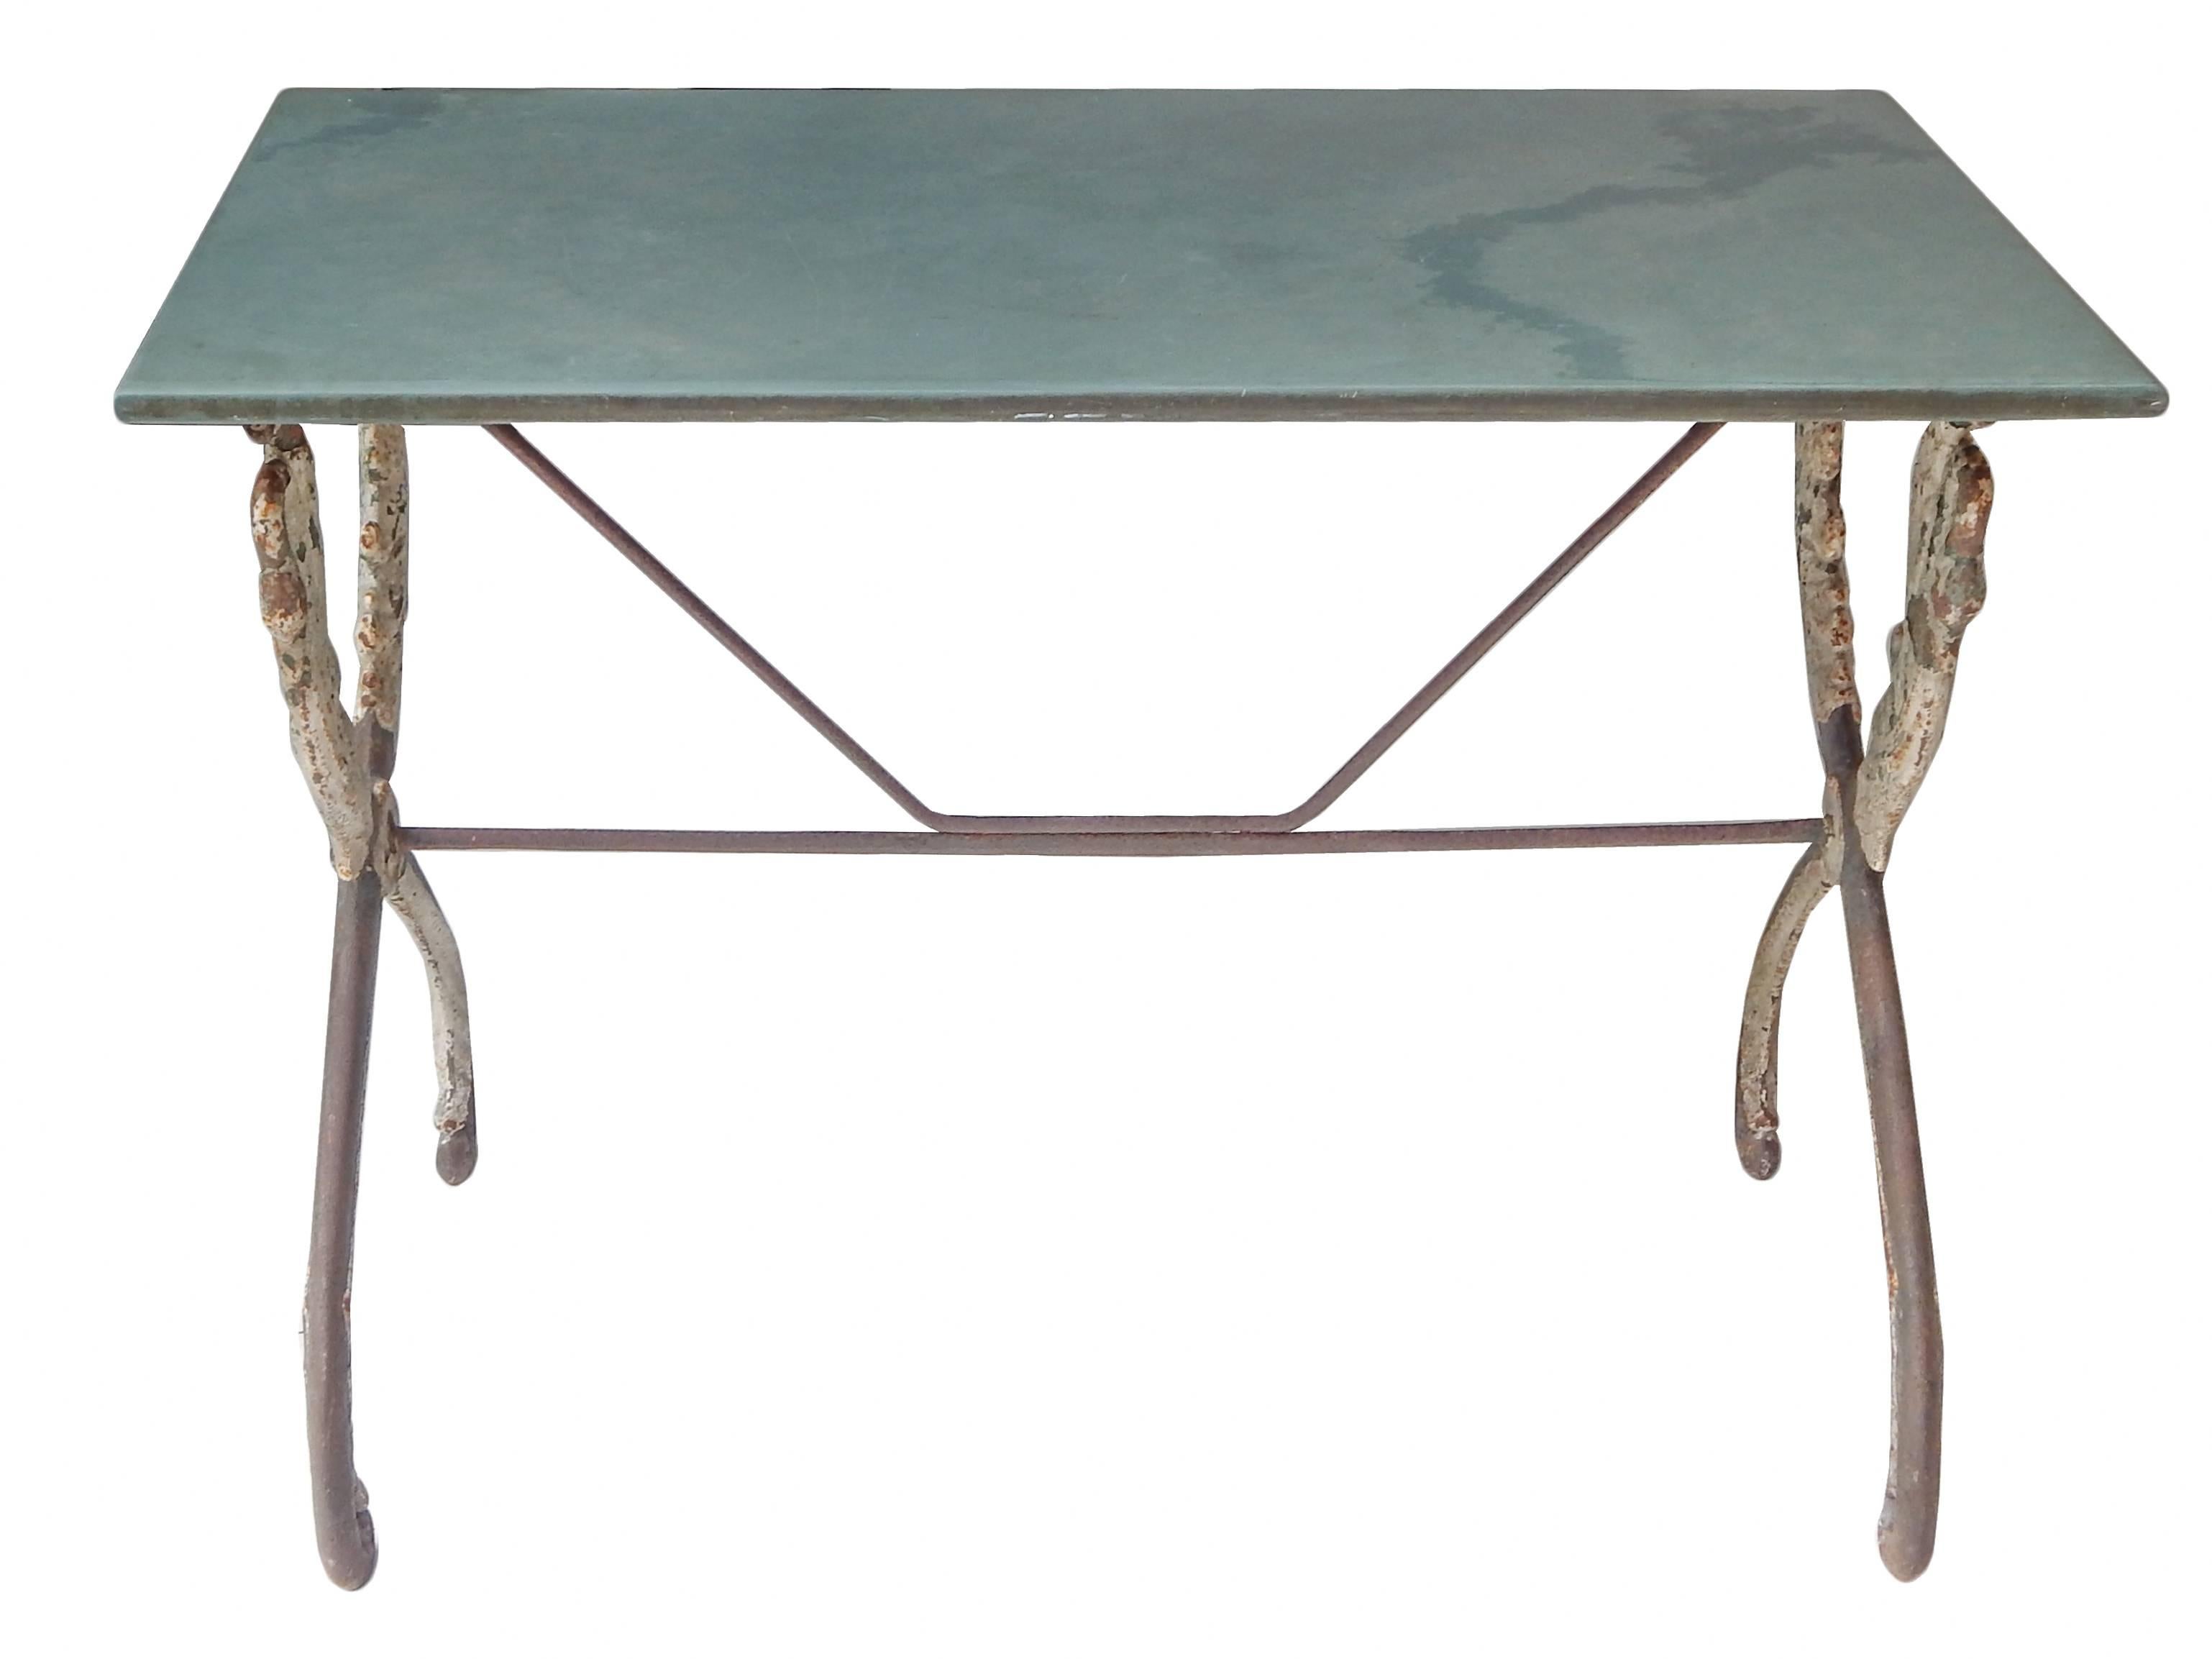 French iron swan table with honed slate top.